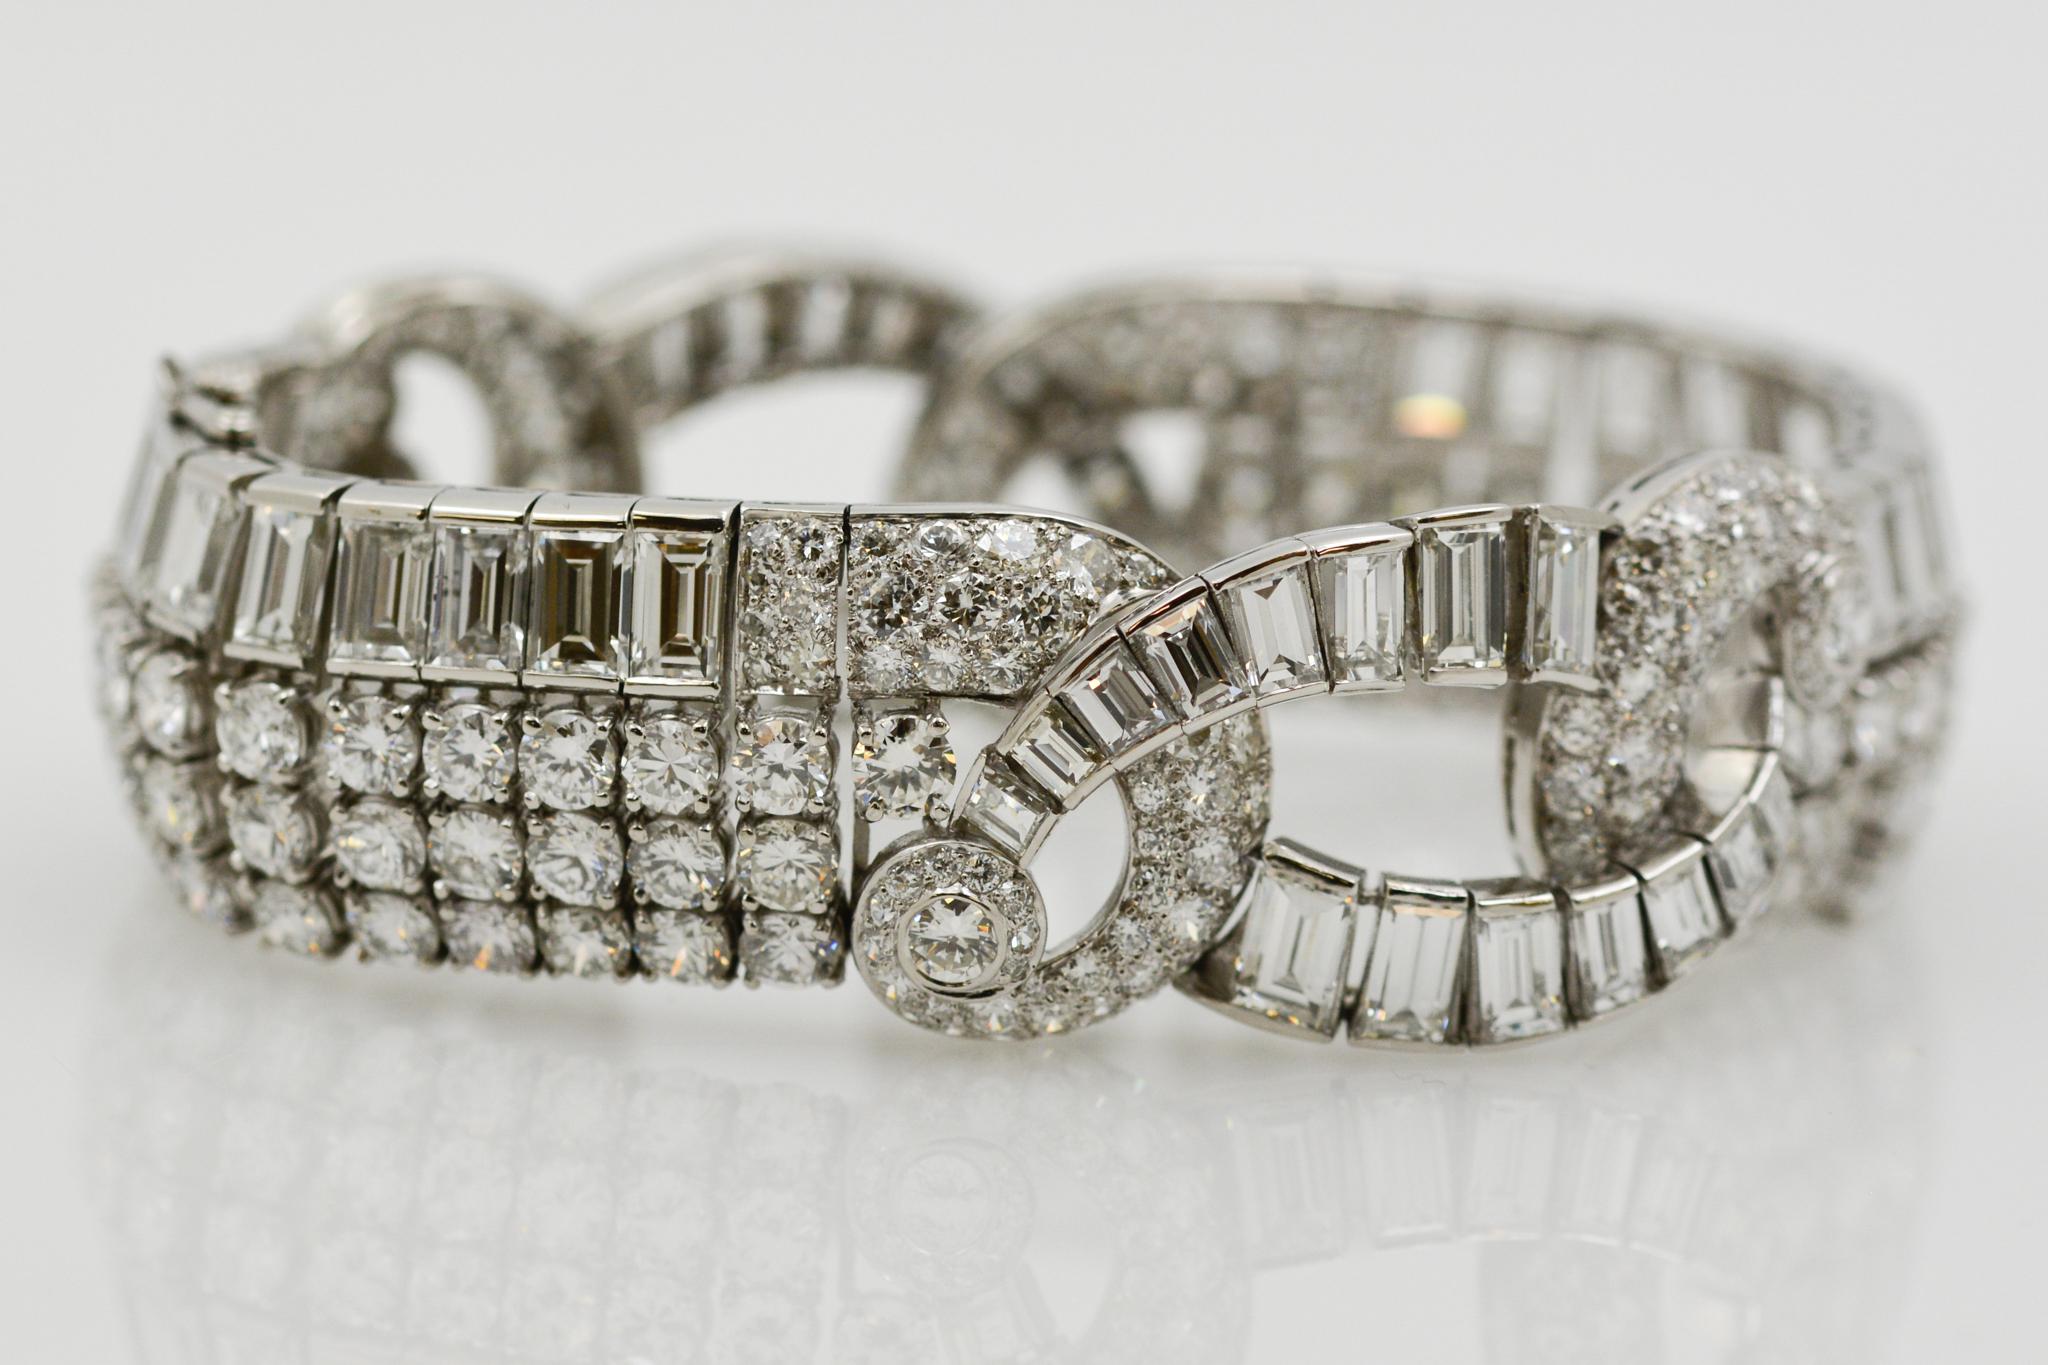 This platinum Art Deco bracelet displays lavish elegance with an intricate design of 51 baguette and 263 round diamonds with a combined total weight of 37.00 carats GH VS. The bracelet measures at ¾” wide and 7” long with decadence you can feel.